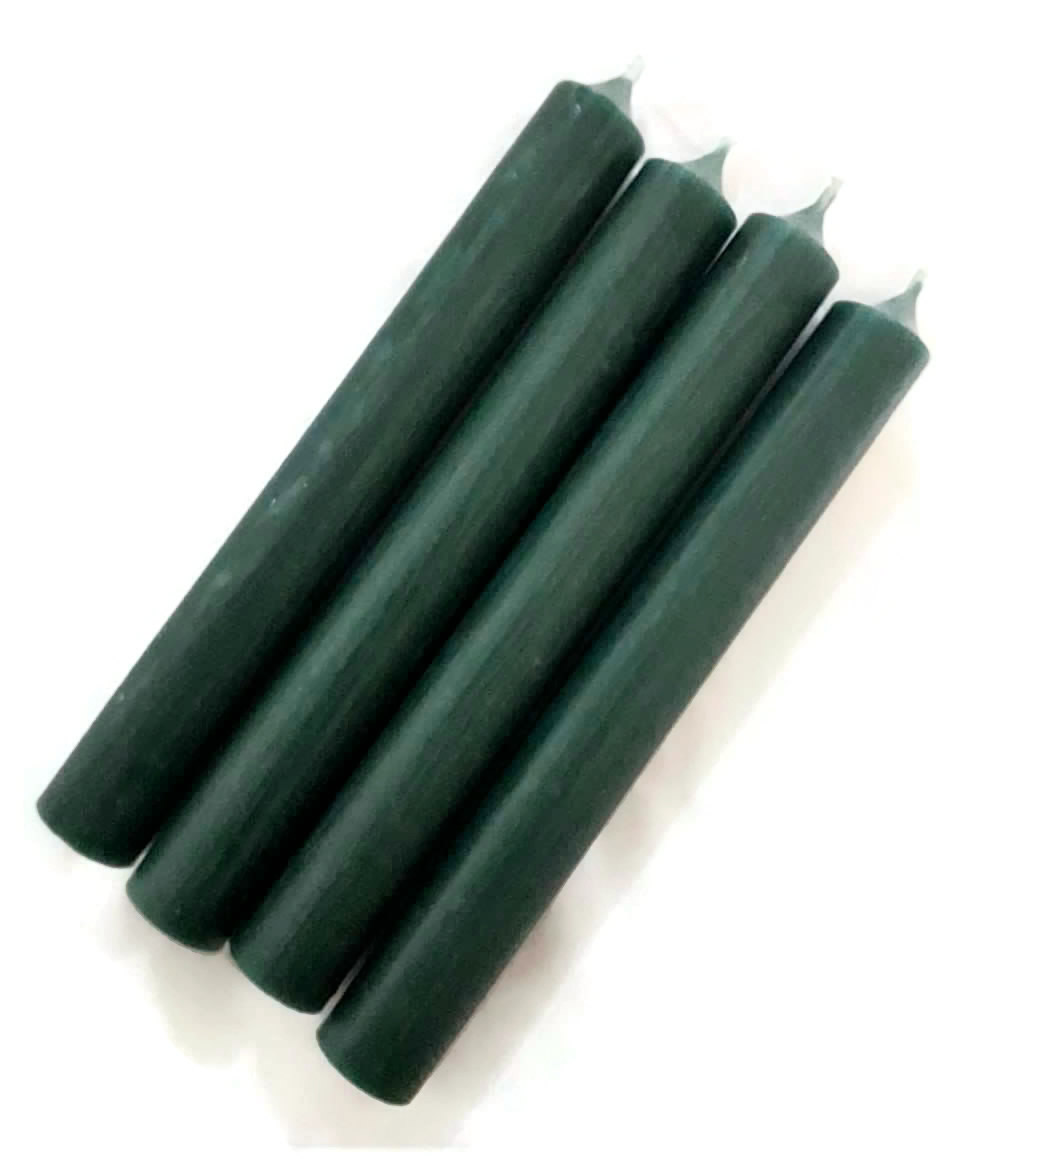 Solid Colour Dark Green 7 Inch Dinner Candles